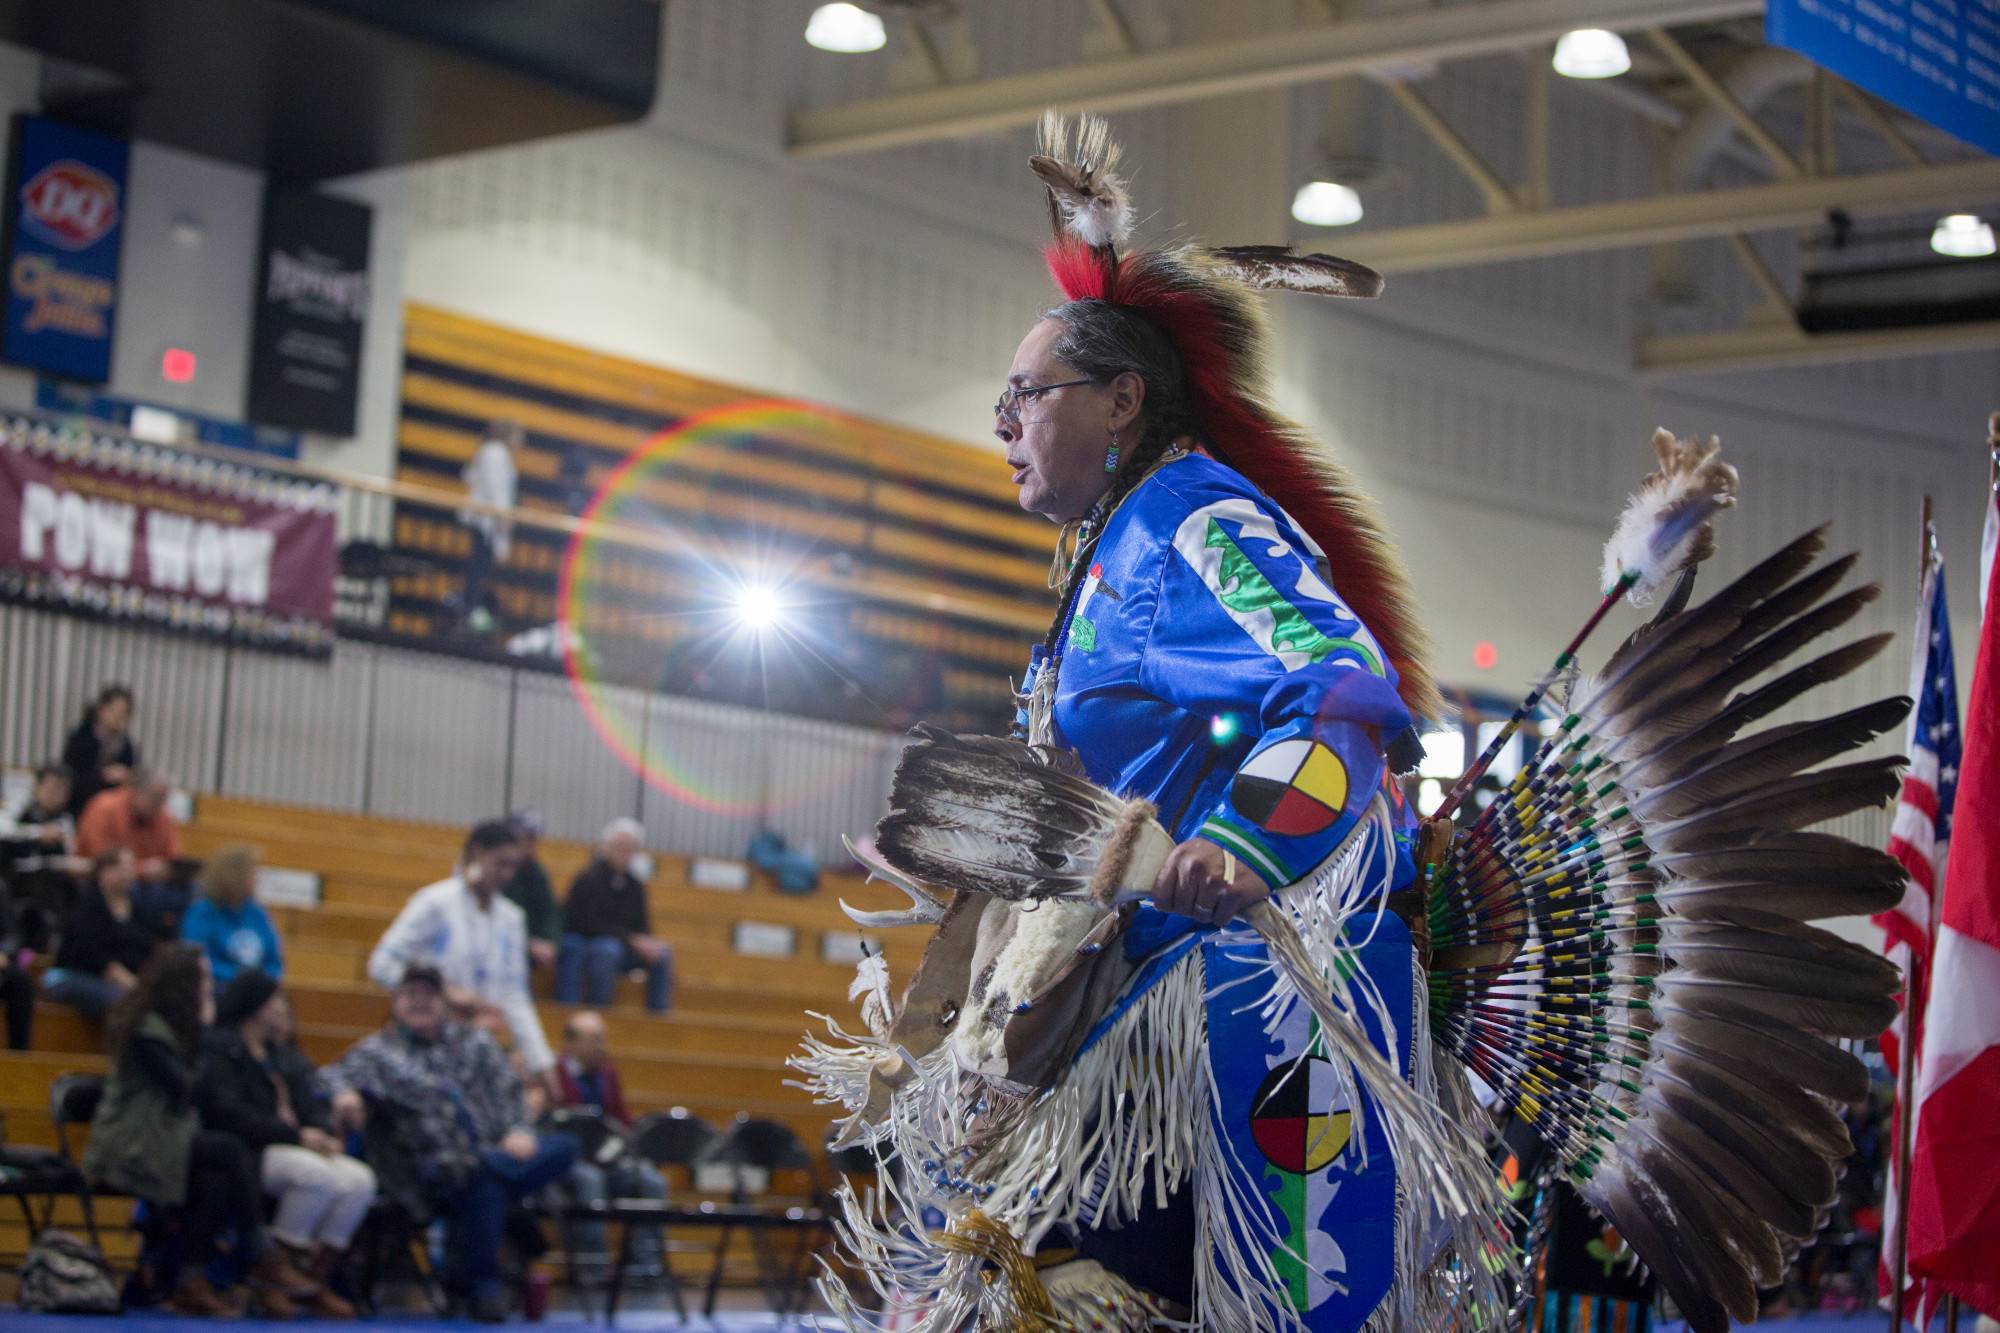 A Native American Pow Wow held by NAAC at GVSU.